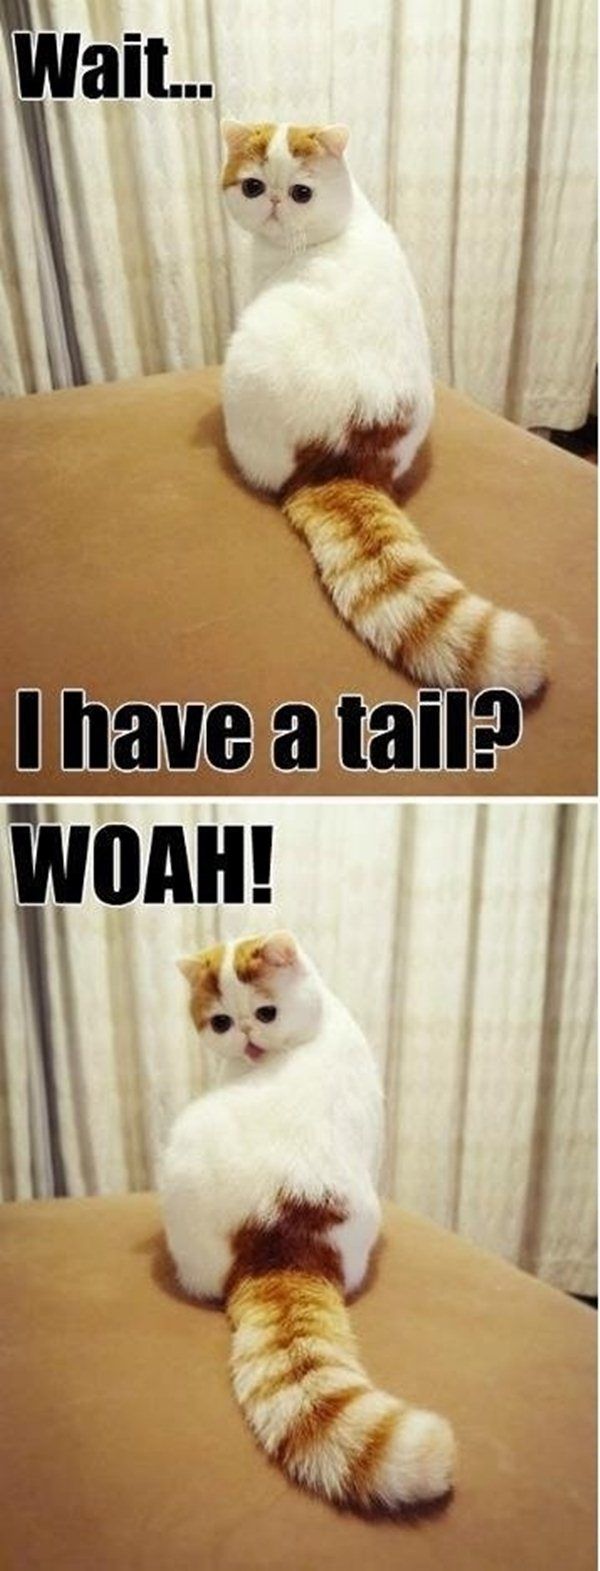 LOL Cat: I have a tail...